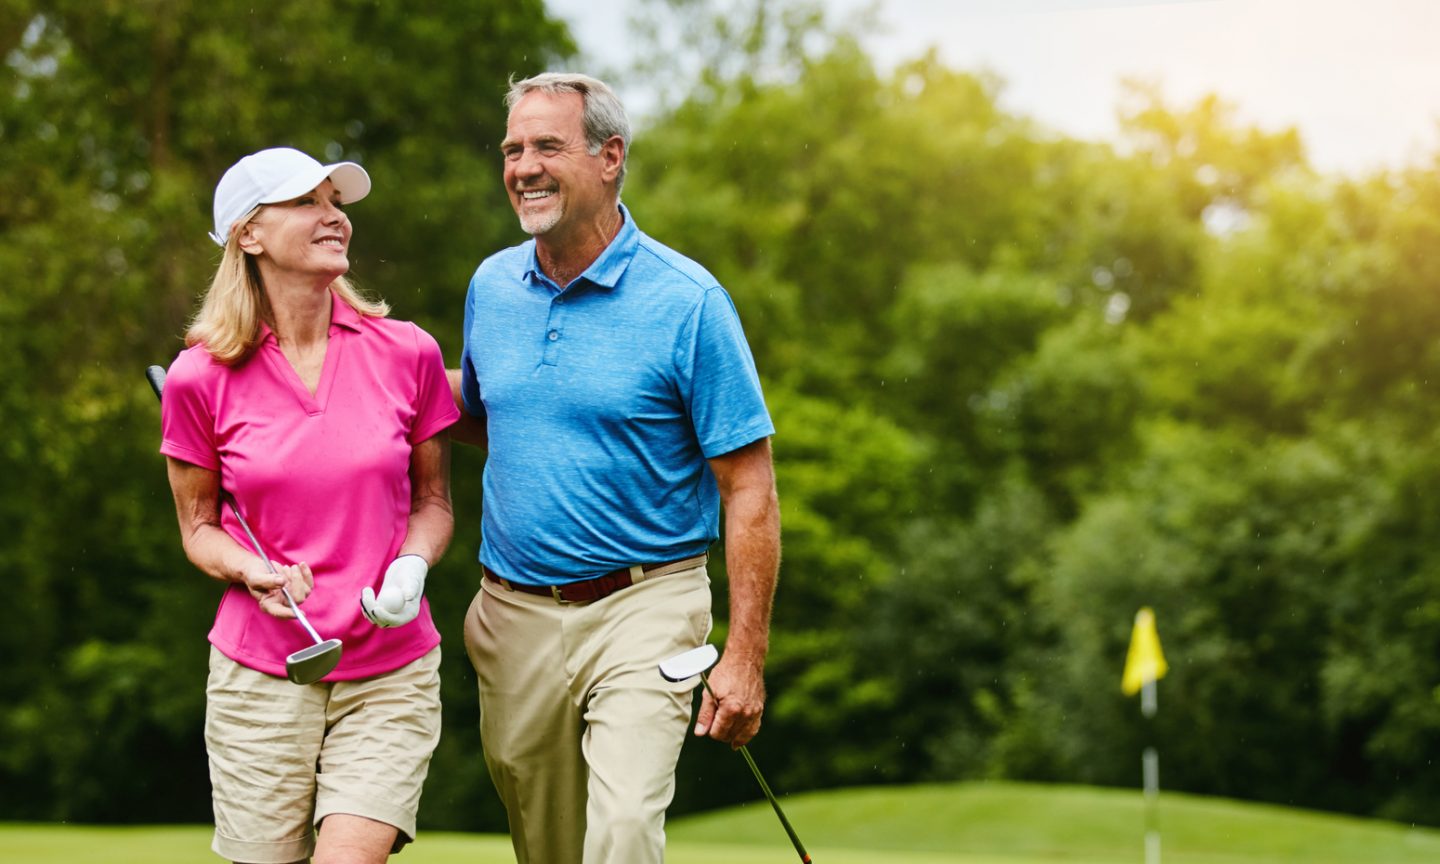 How to Earn and Use Travel Rewards by Golfing - NerdWallet